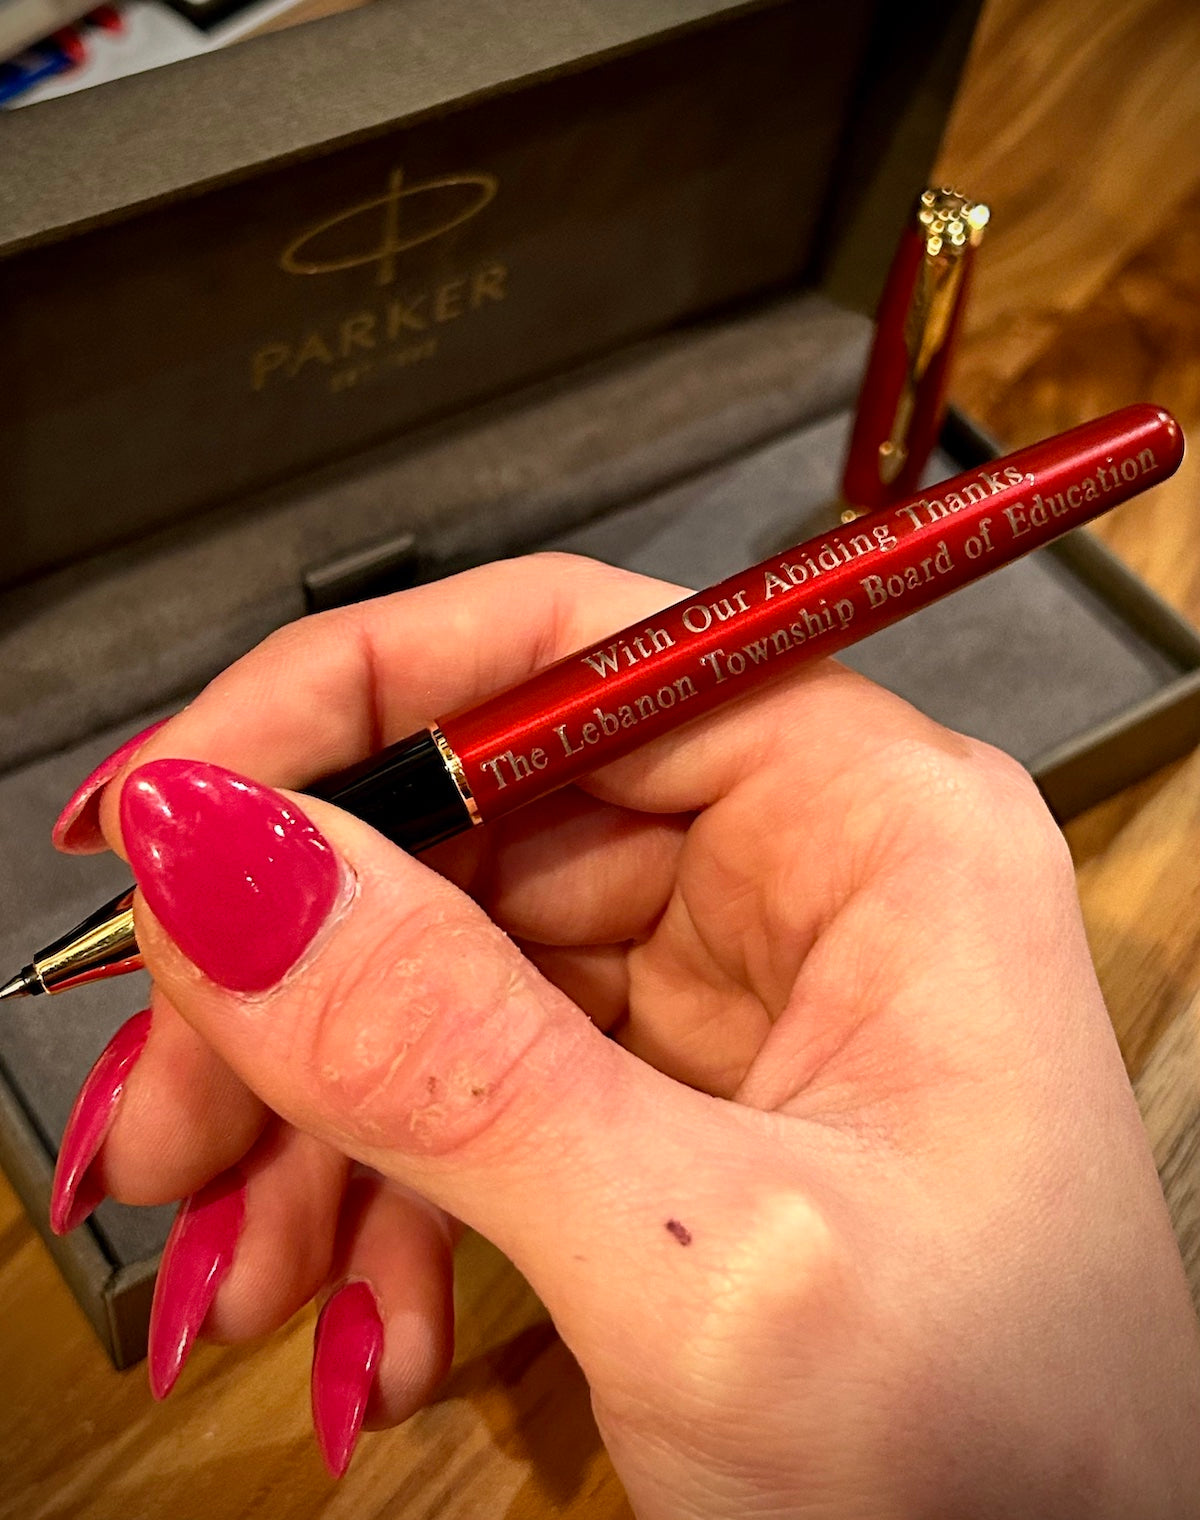 Parker Sonnet Red Lacquer with Gold Trim Rollerball Pen